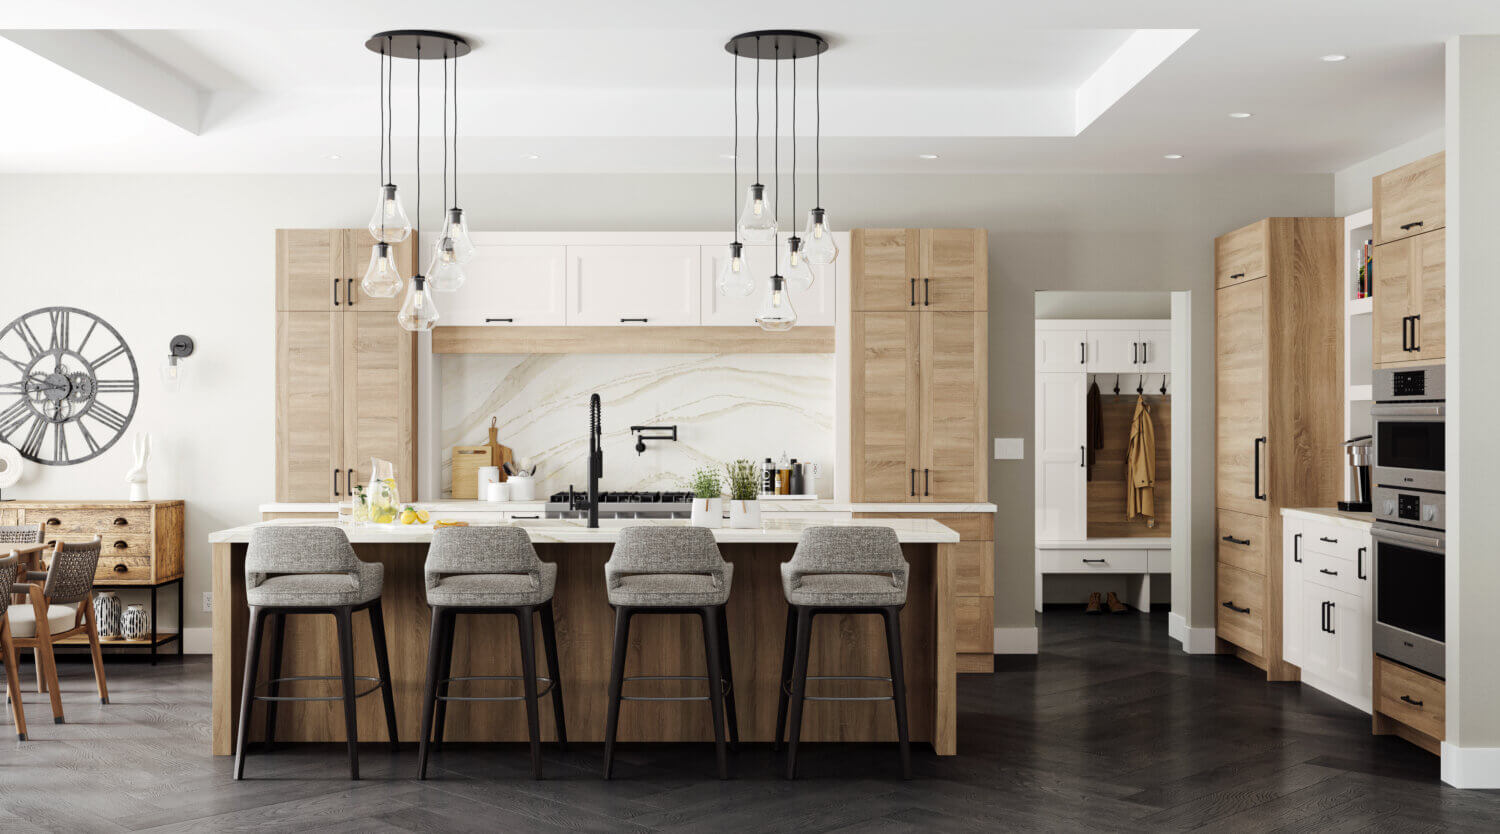 This kitchen has an American take on Scandinavian interior design style. The design features the slab Dash cabinet door style with wood plank-like details in a rustic oak texture mixed with a shaker door style in white paint. This kitchen island offers seating for four plus a kitchen sink across from the cooktop.